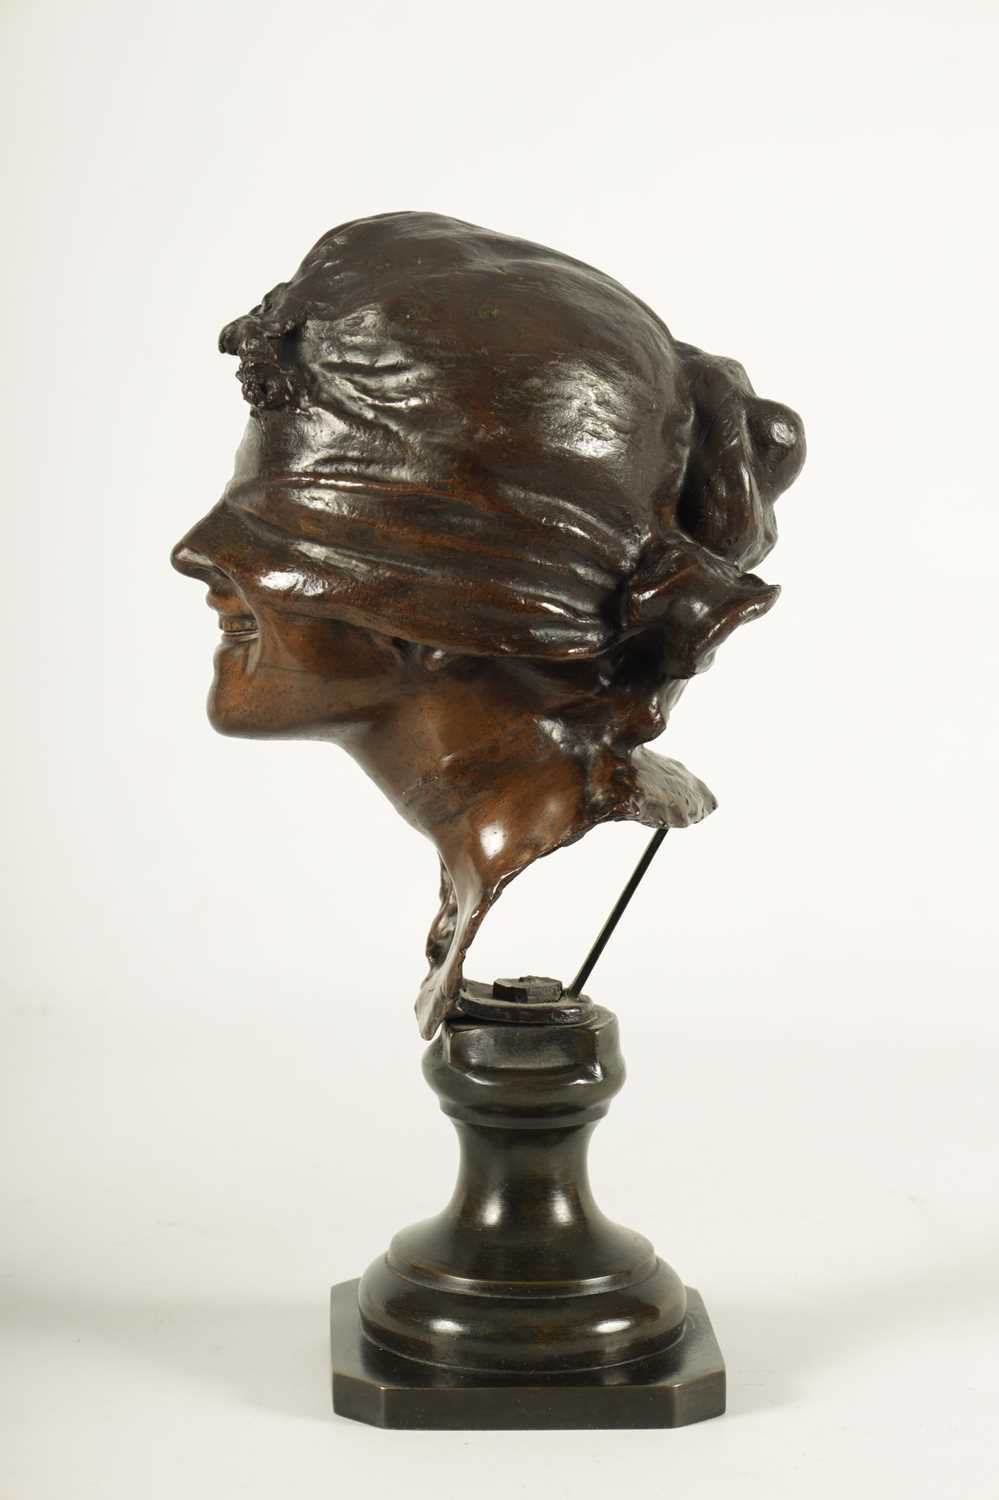 A LATE 19TH CENTURY NEAPOLITAN BRONZE BUST - Image 4 of 7